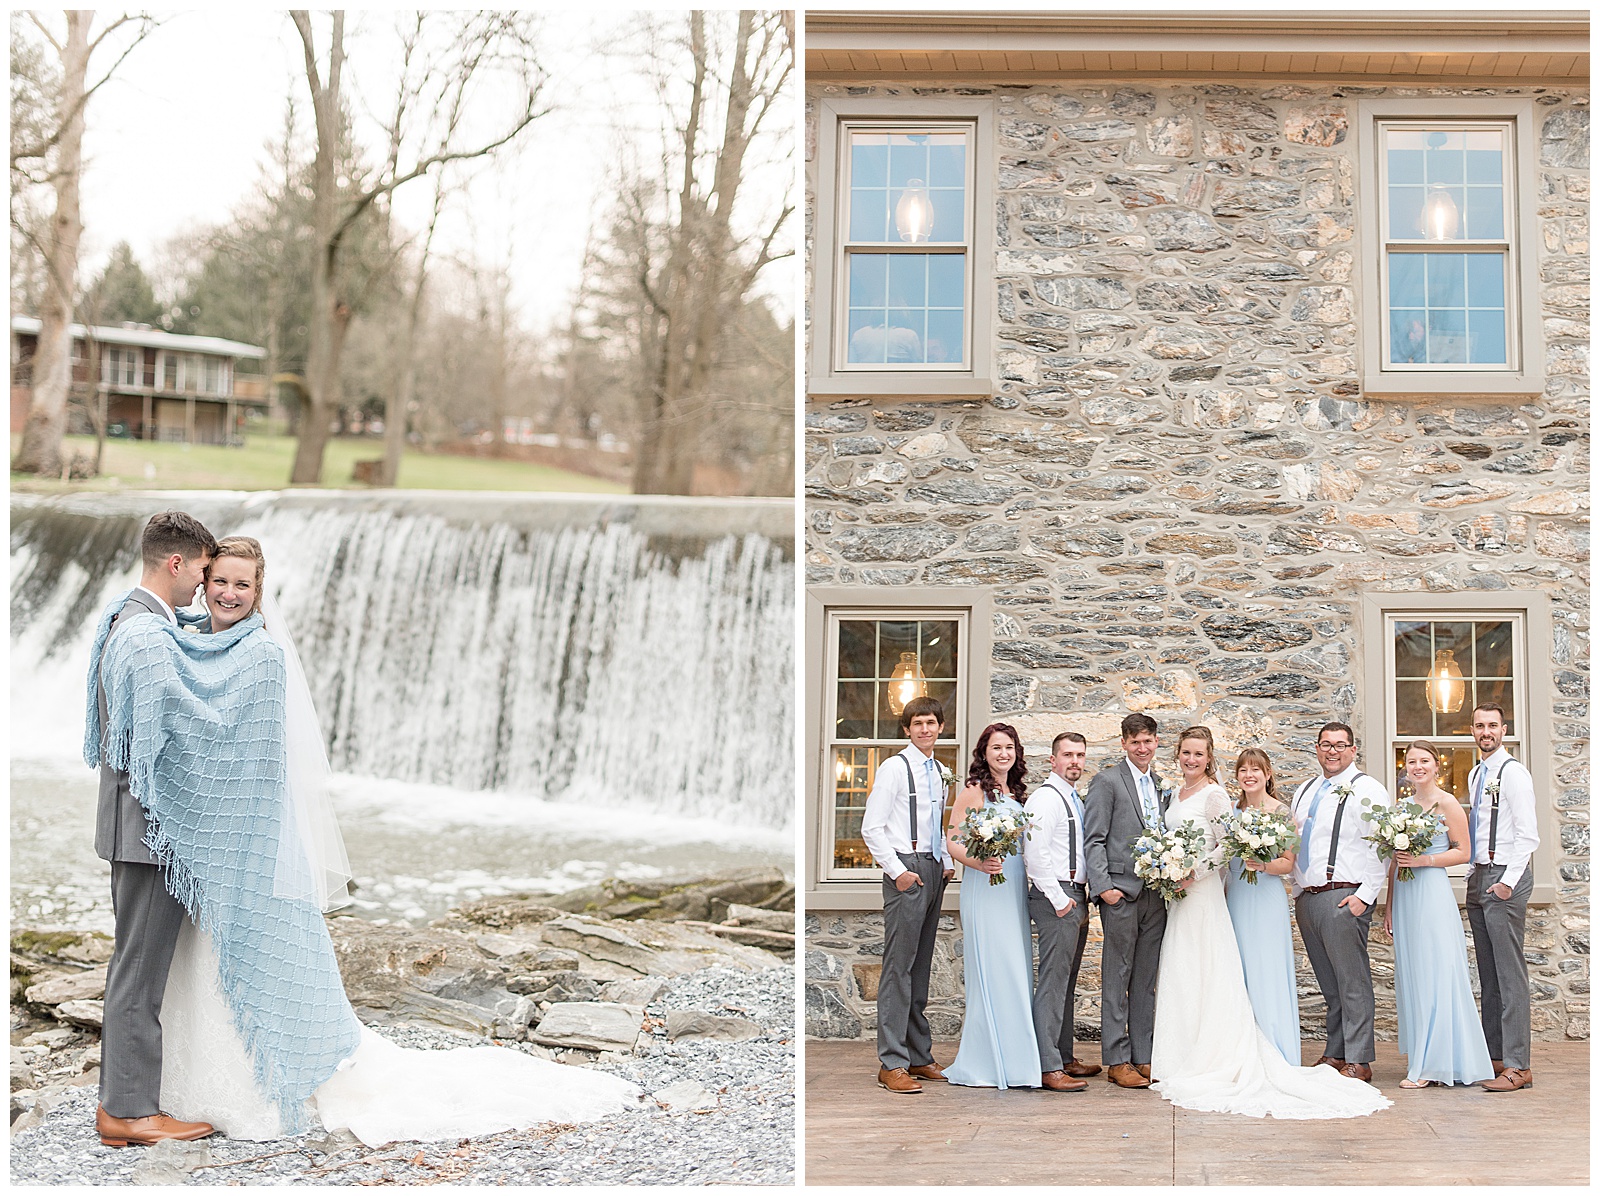 couple with their bridal party outdoors by stone wall of mill on overcast day